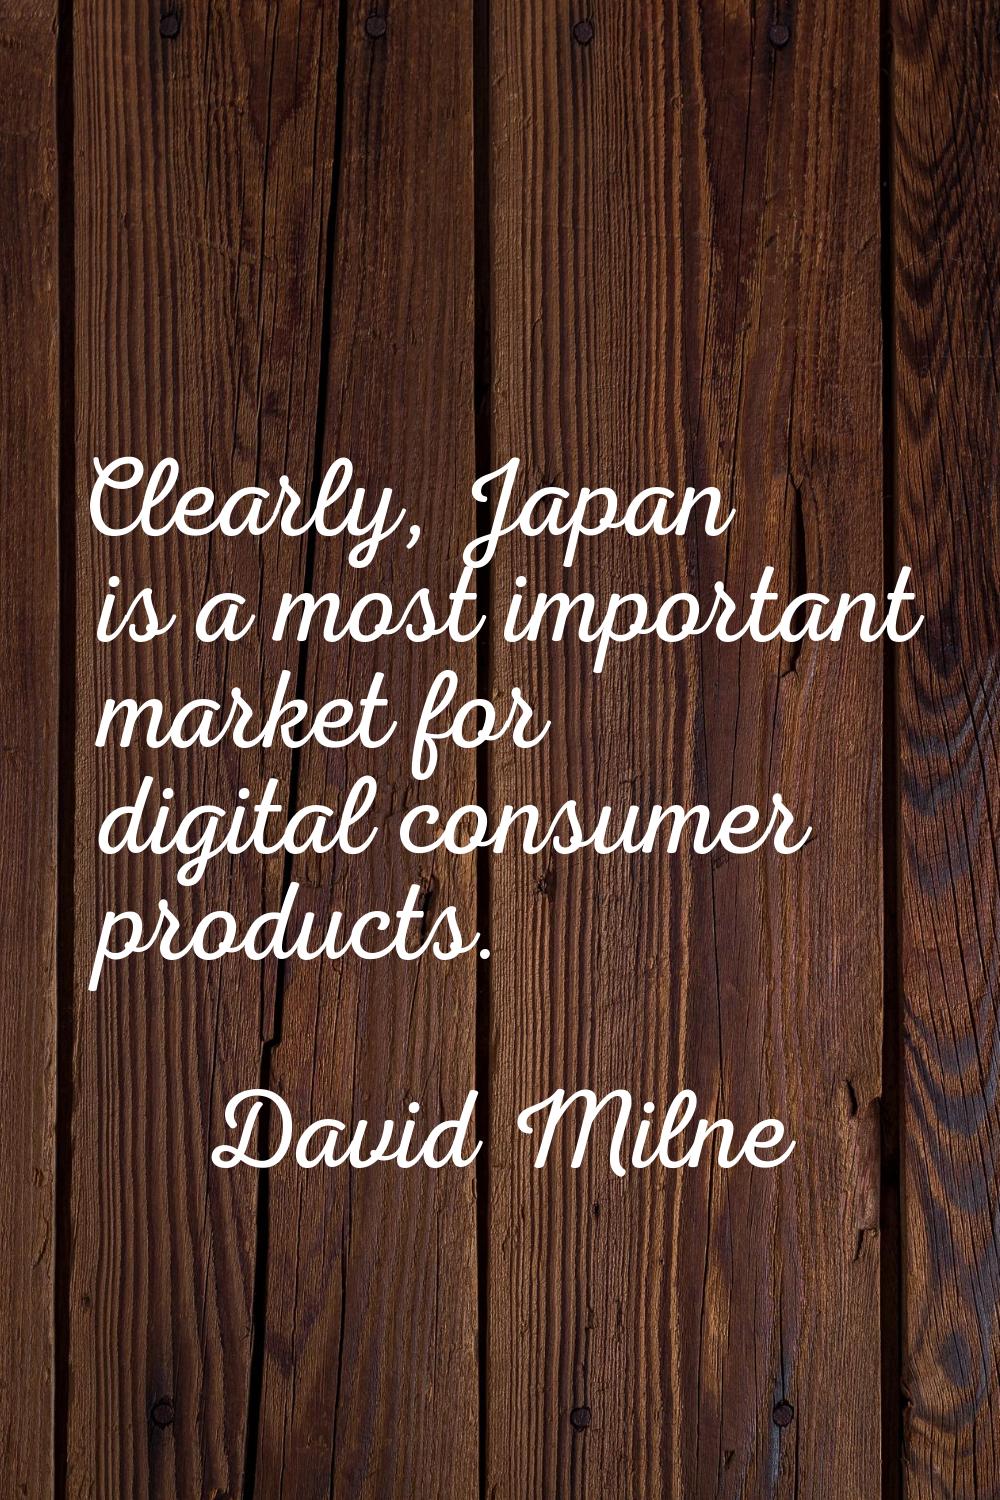 Clearly, Japan is a most important market for digital consumer products.